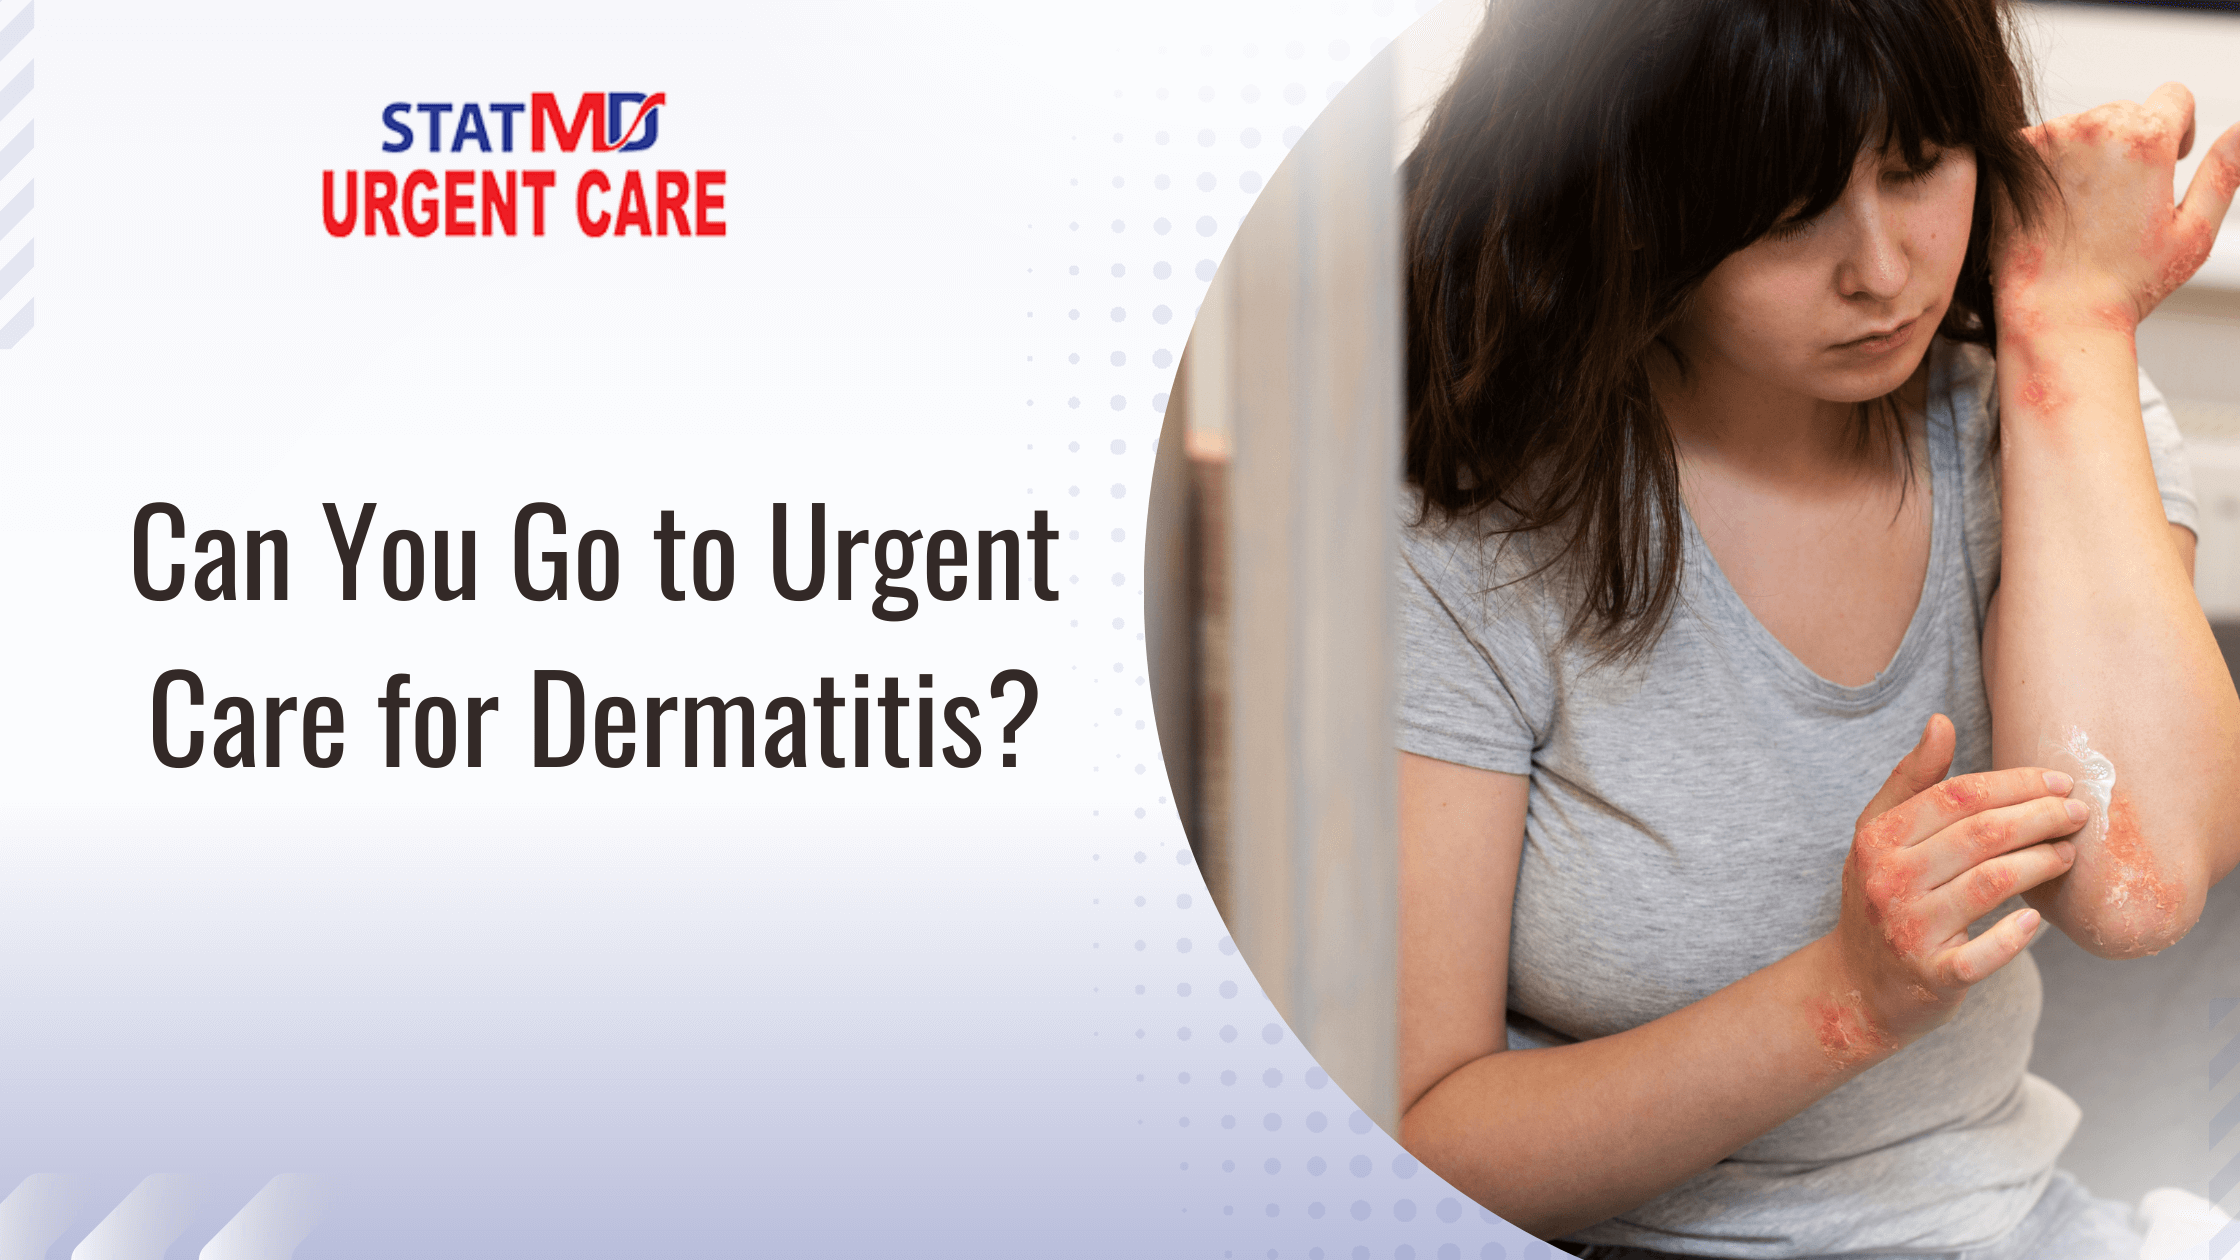 Can You Go to Urgent Care for Dermatitis